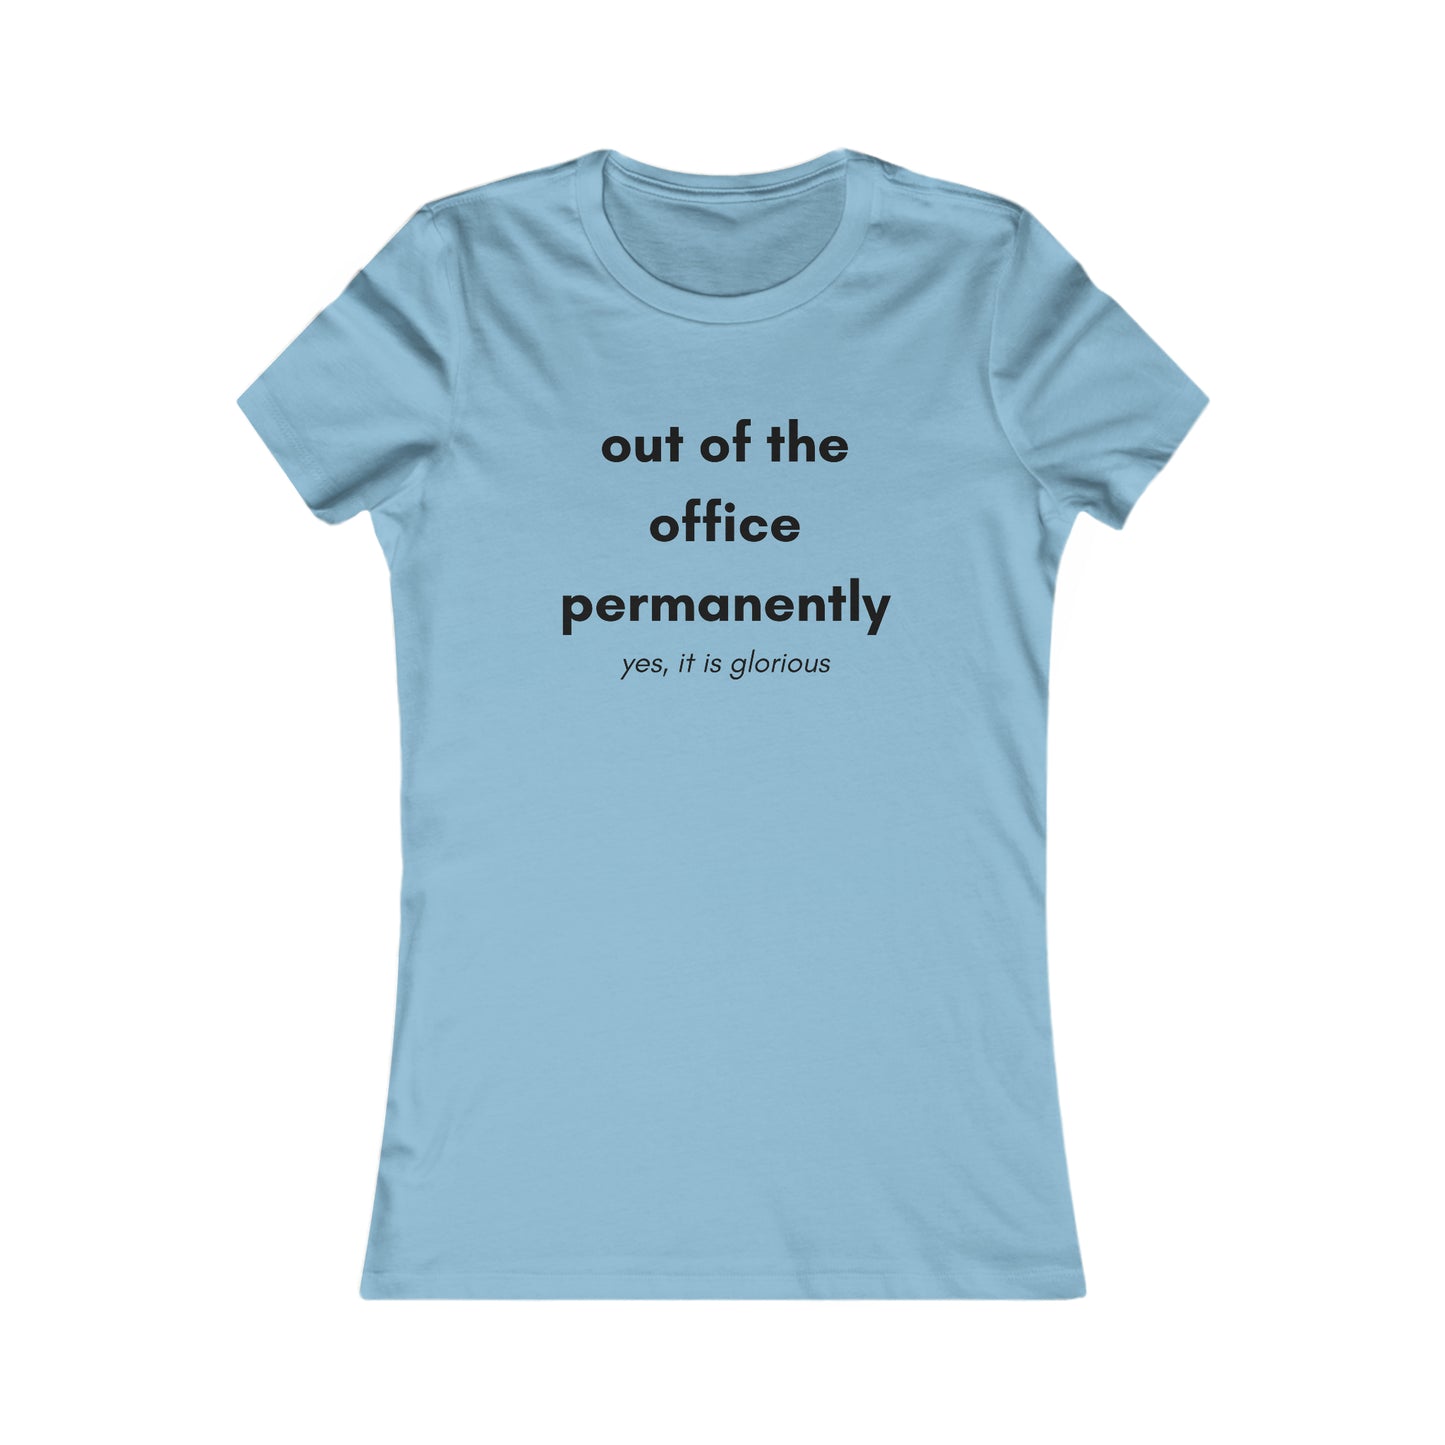 "Out of the office permanently yes it is glorious” Women's Favorite Tee designed for lucky person in several colors for you to choose from. Slim fit so please check the size table.